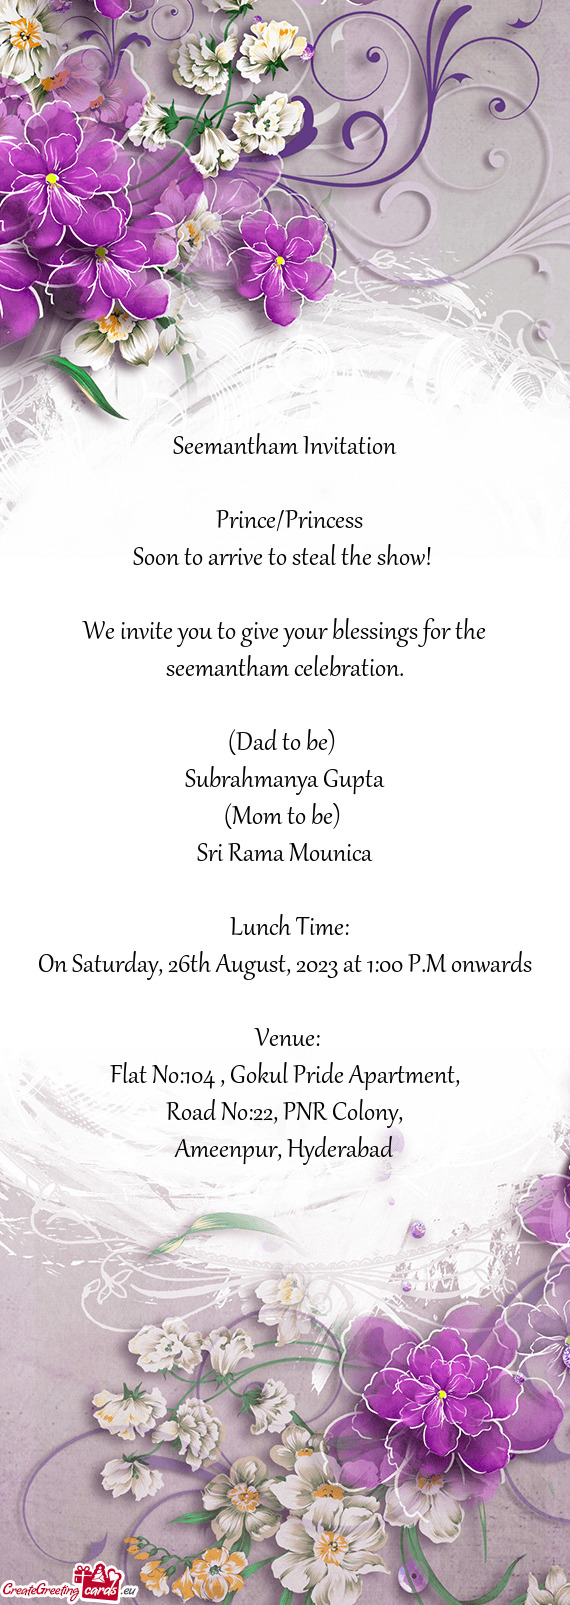 On Saturday, 26th August, 2023 at 1:00 P.M onwards